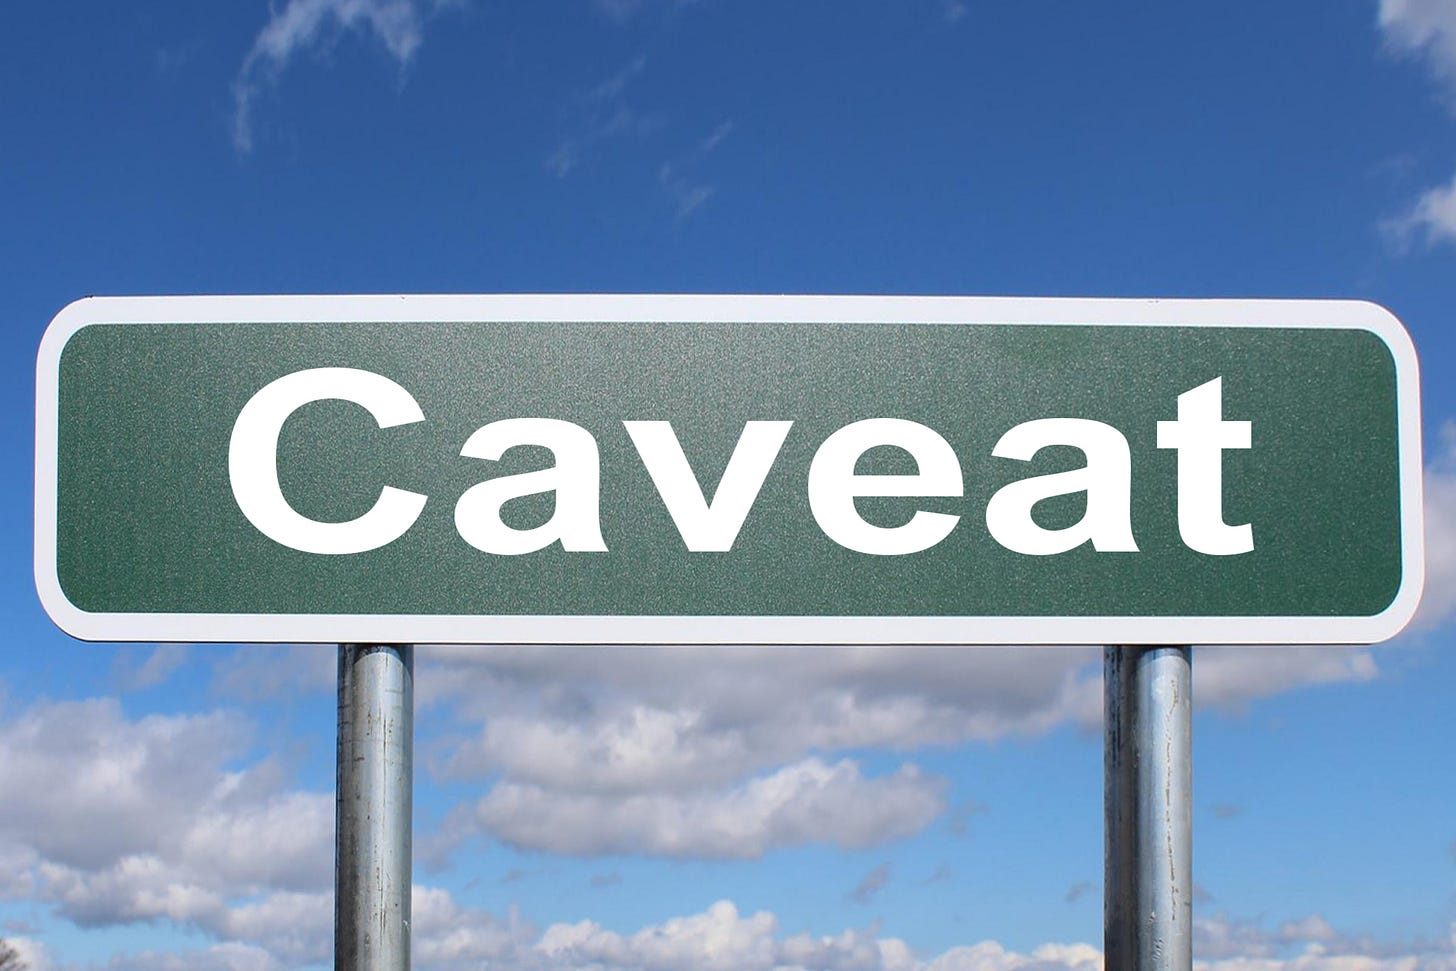 Caveat - Free of Charge Creative Commons Highway sign image